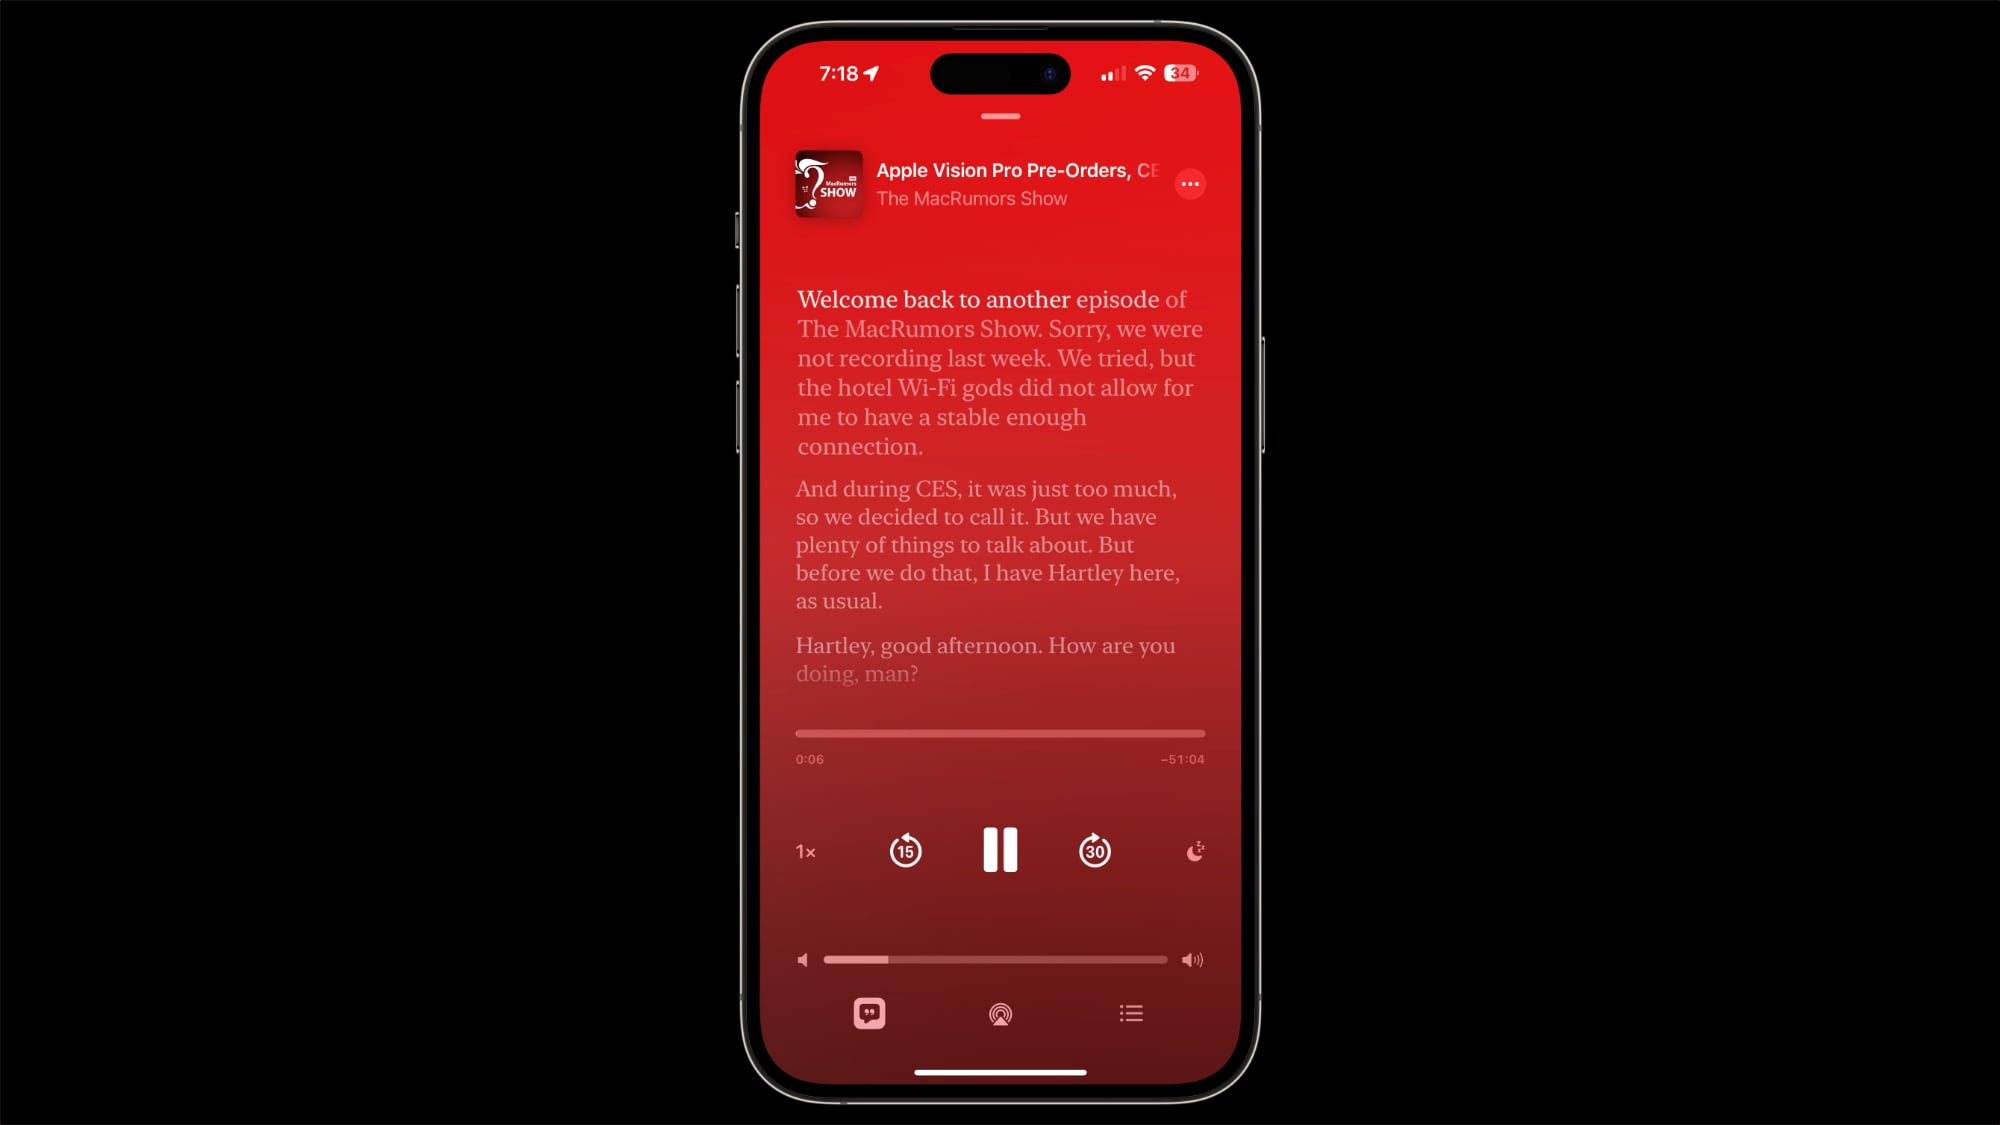 Spotify introduces new transcription feature for podcasts. Here's